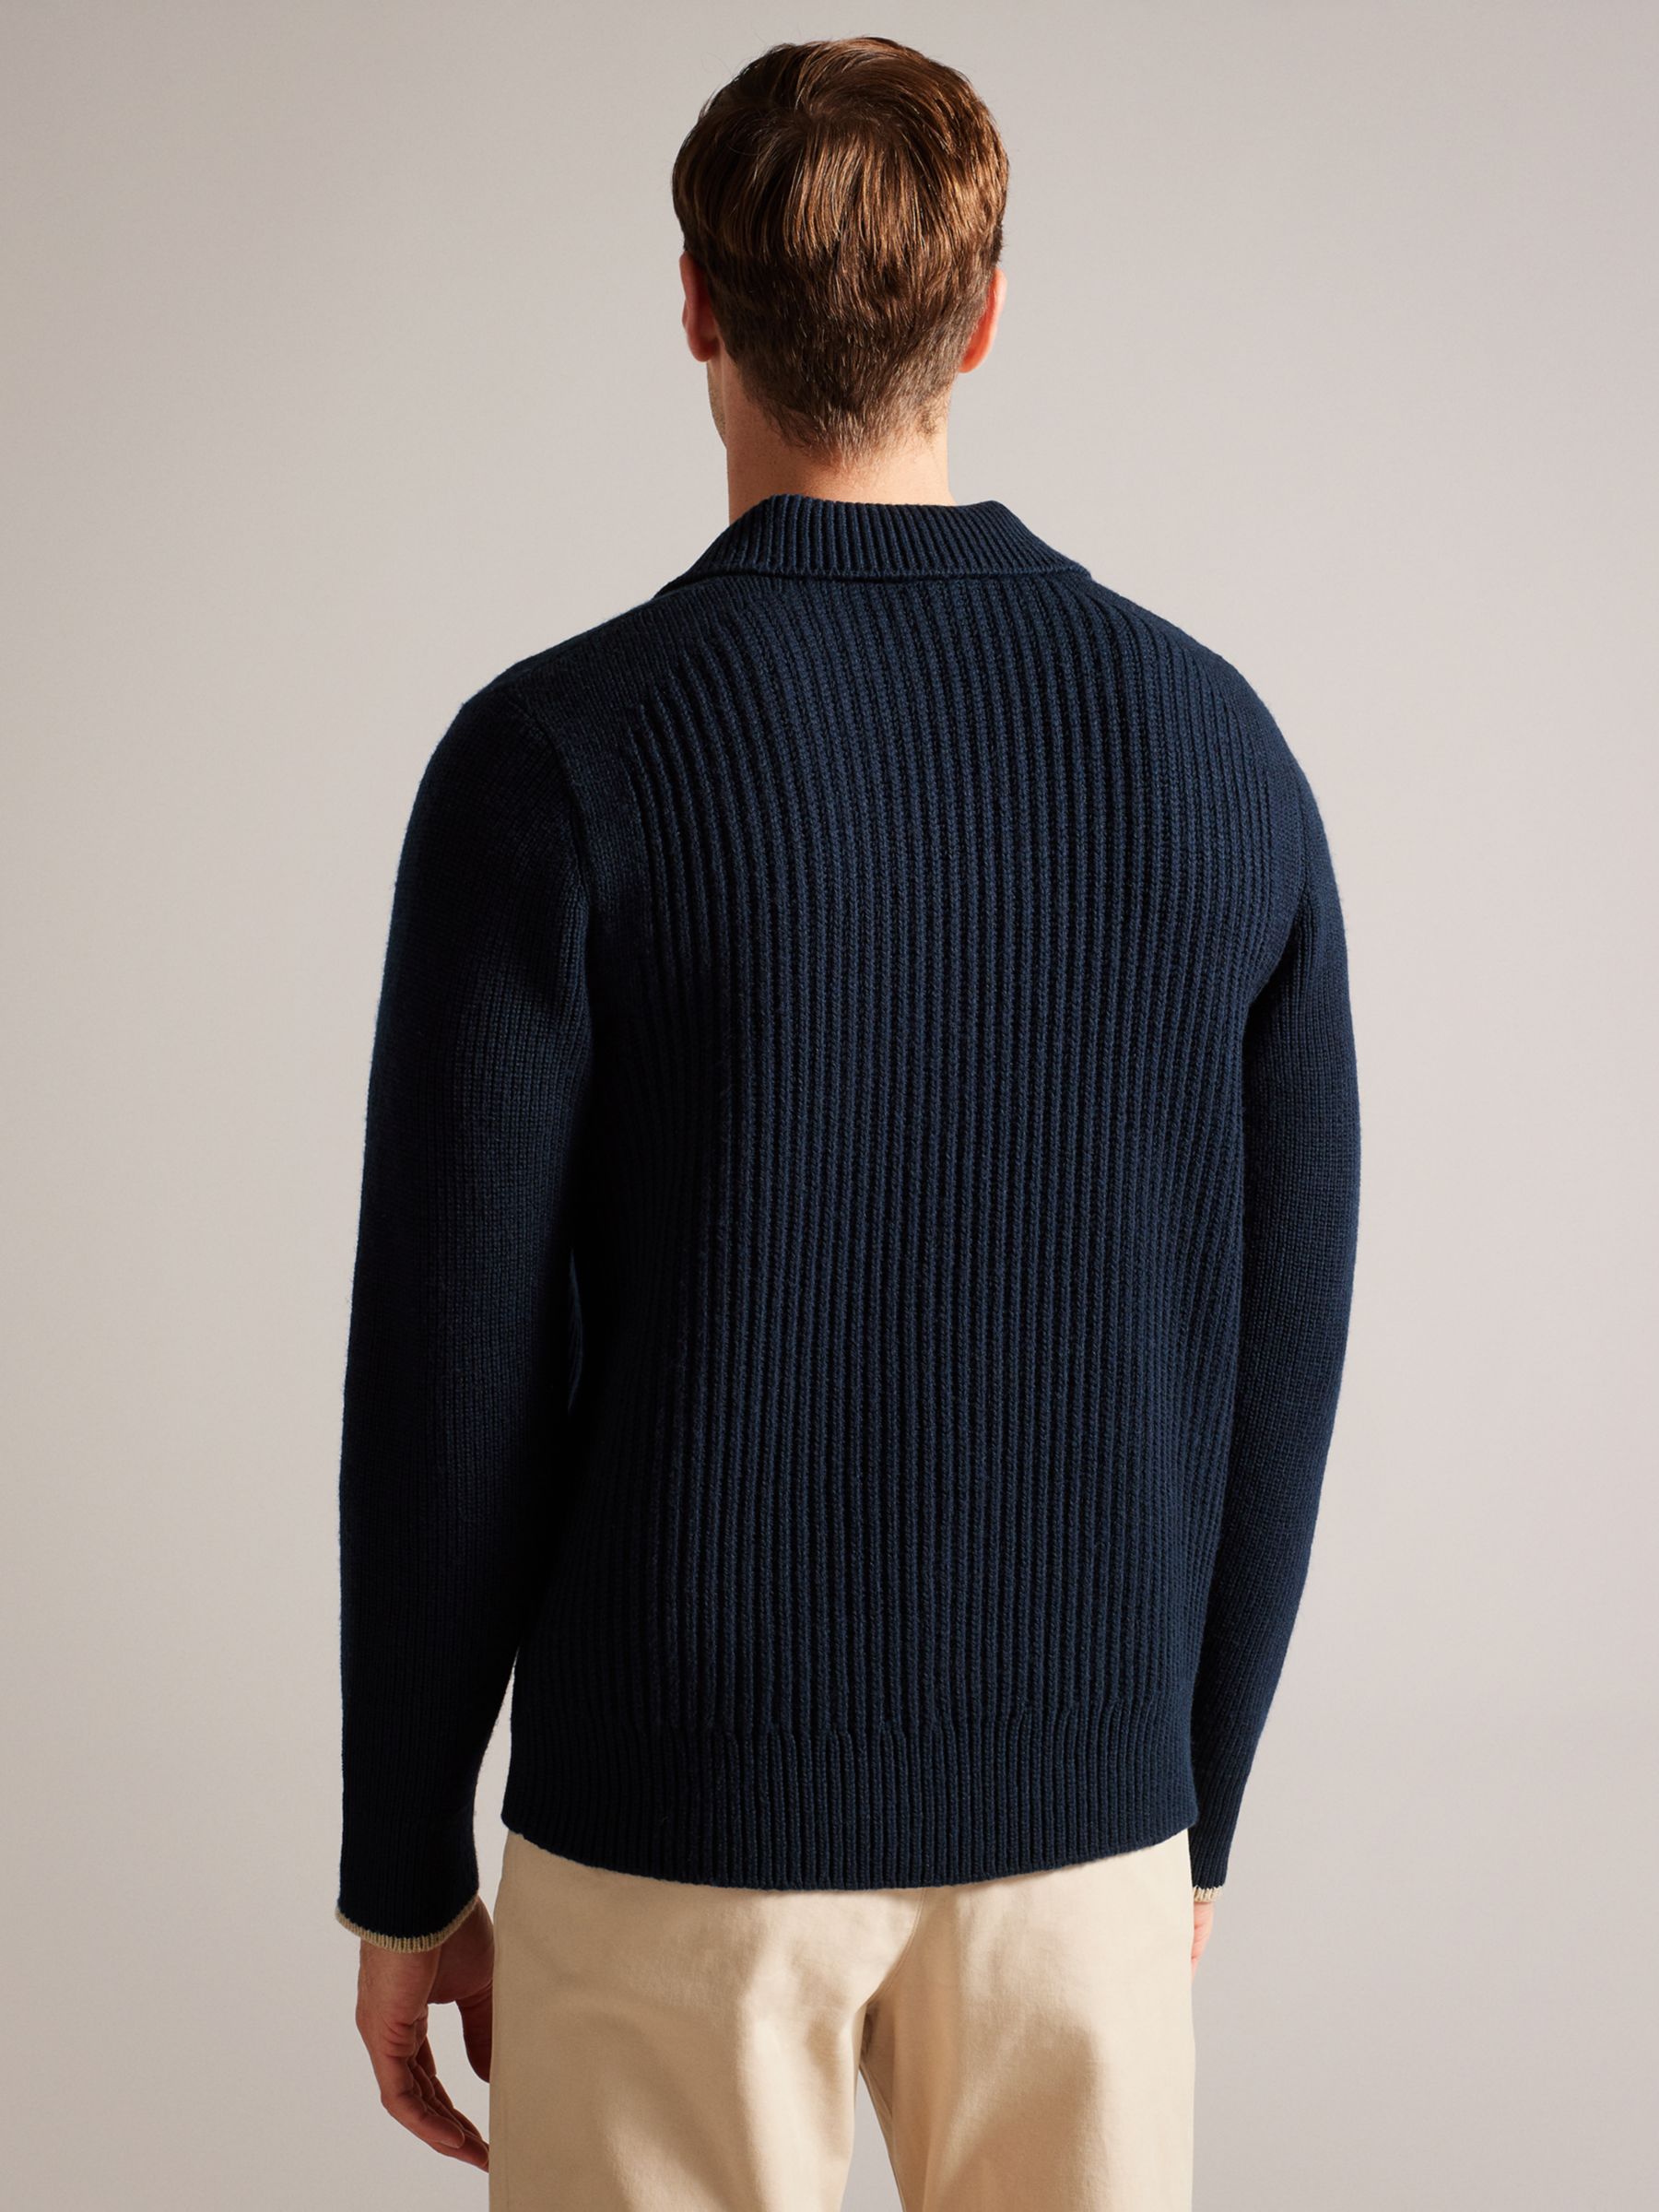 Buy Ted Baker Ademy Long Sleeve Open Neck Rib Polo Shirt Online at johnlewis.com